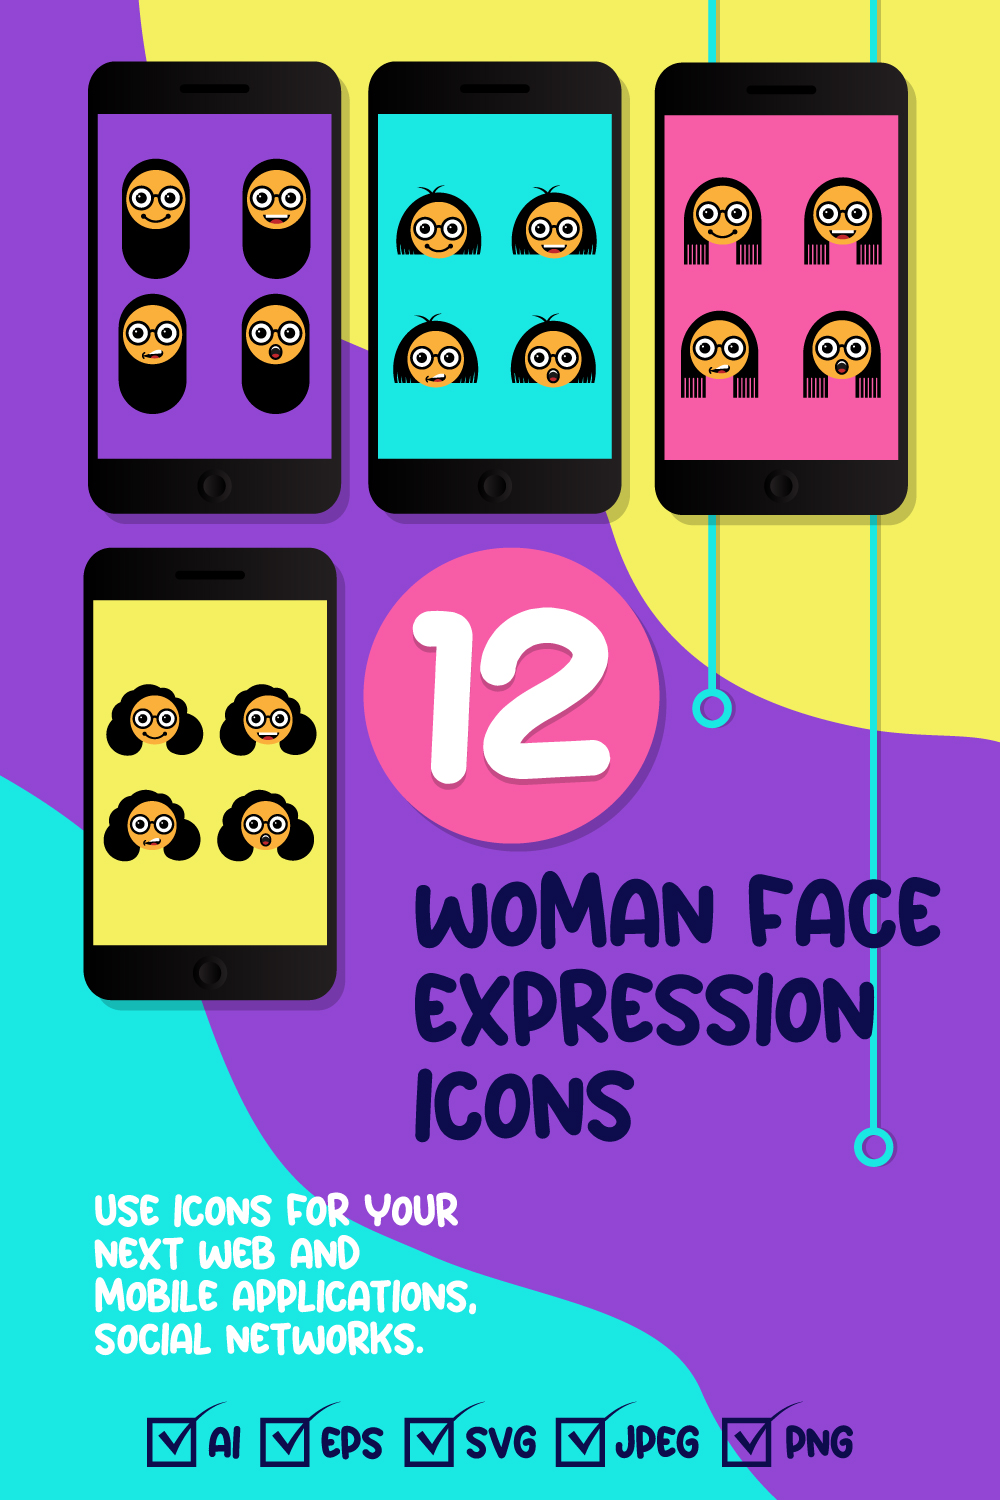 12 Woman Face Expression With Different Hairs Icons - Only $10 pinterest image.